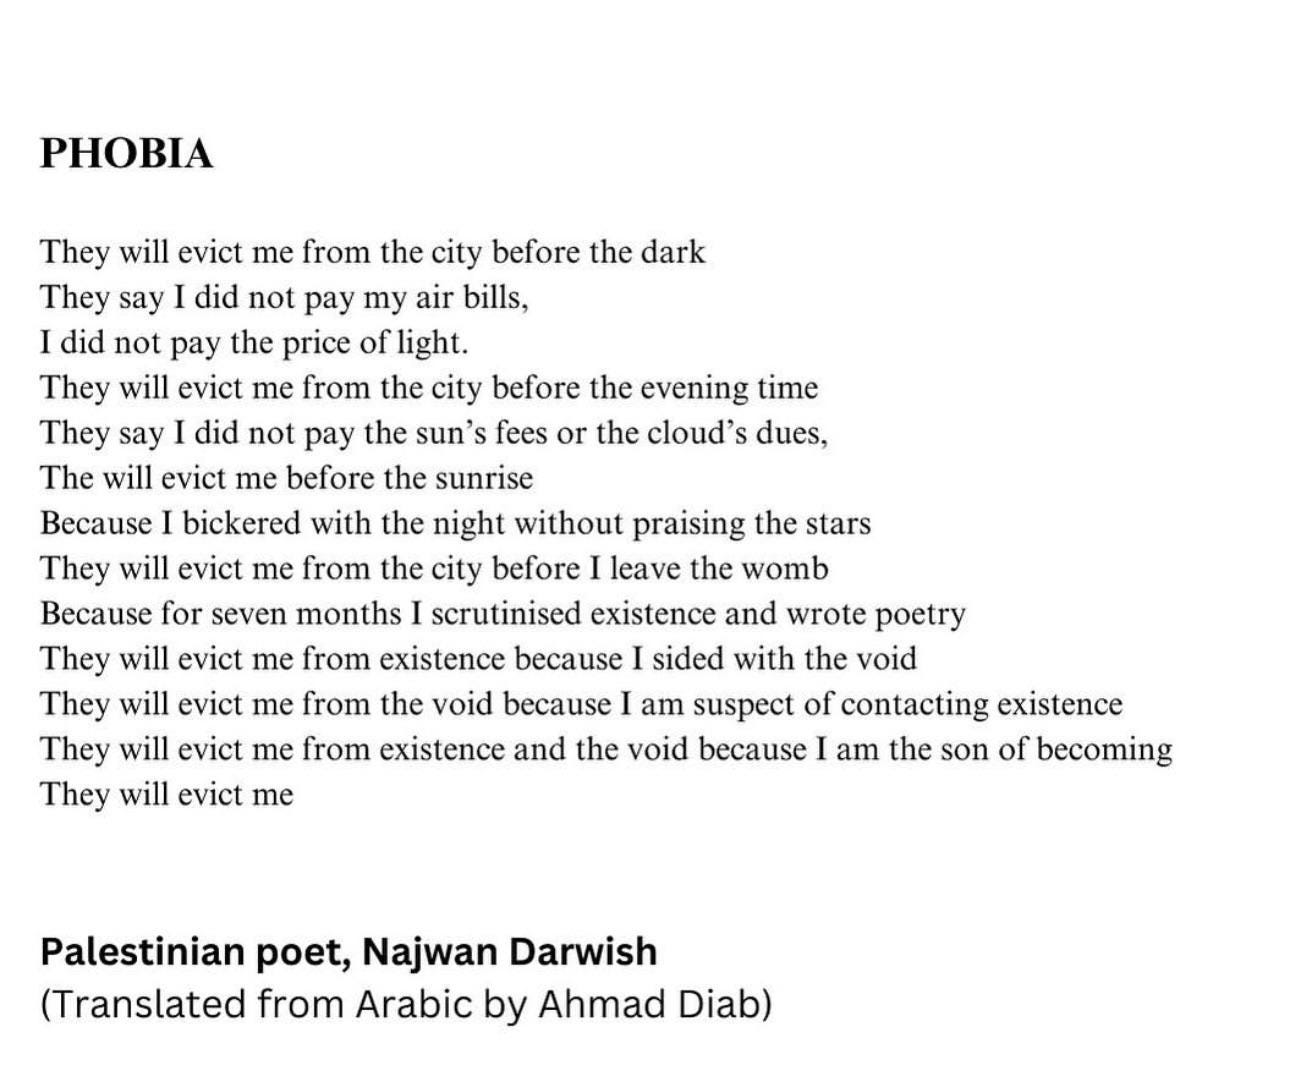 Poem] Enough for Me by Palestinian poet Fadwa Tuqan : r/Poetry